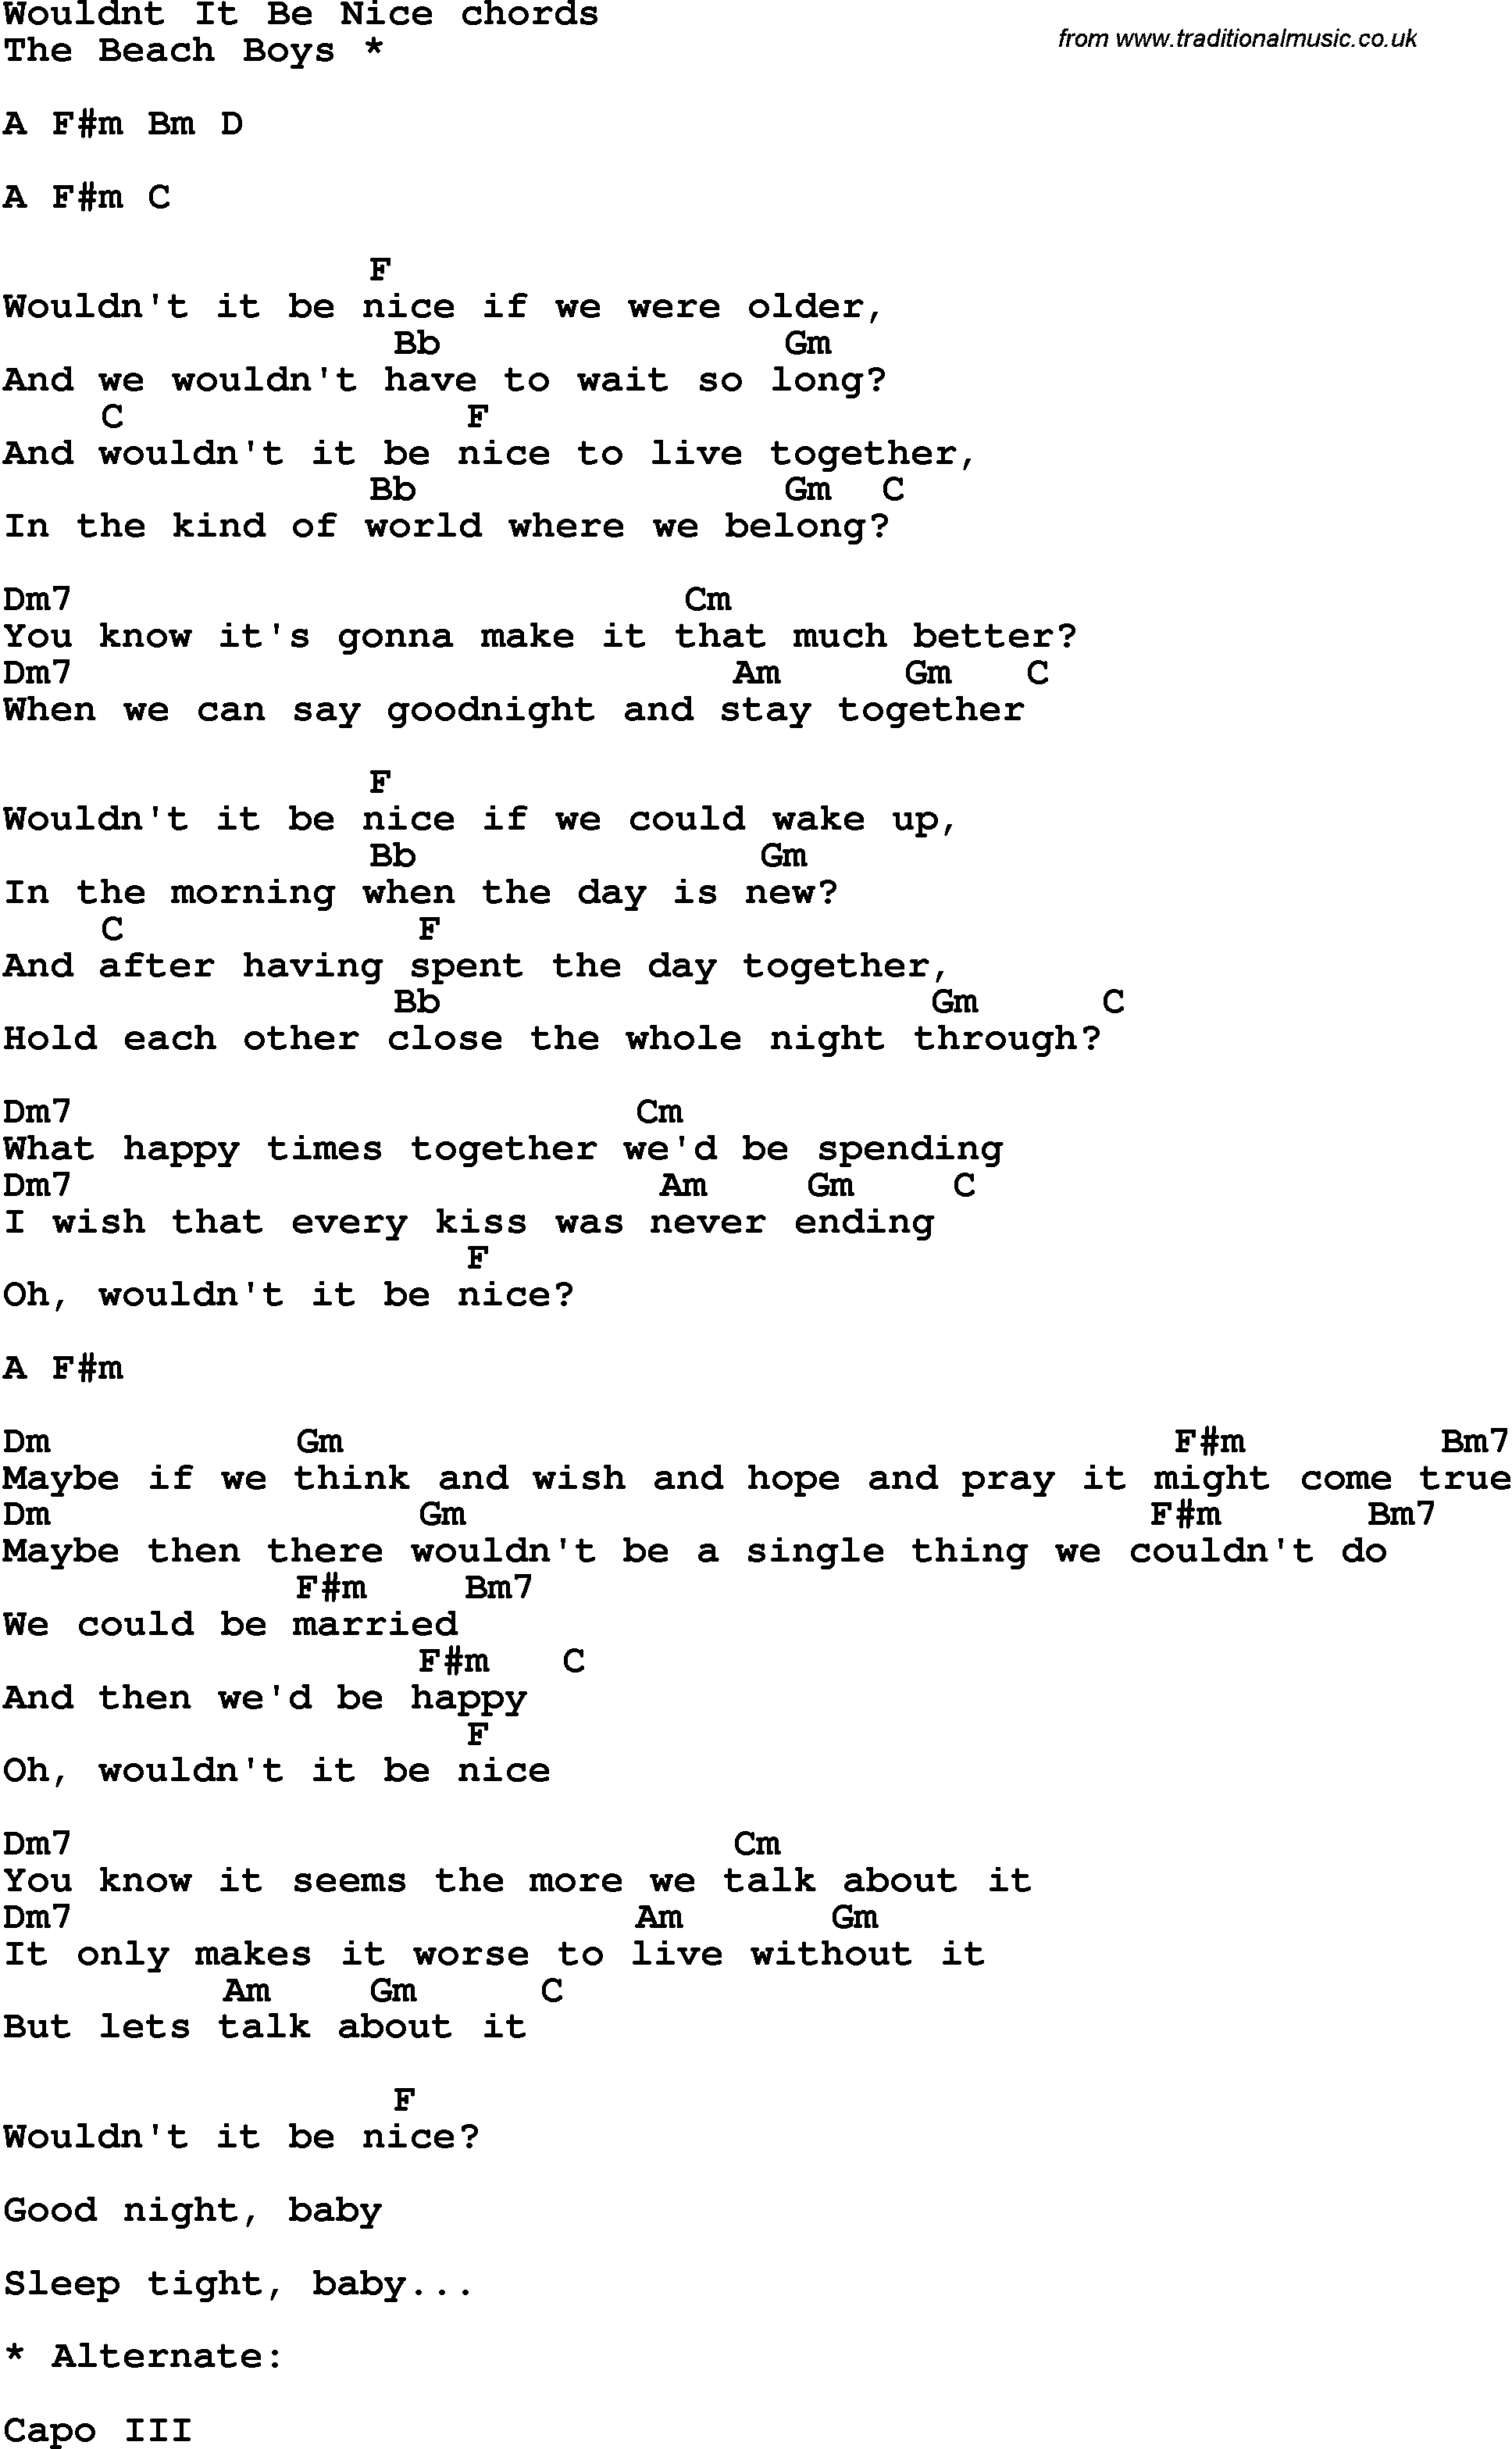 Song Lyrics with guitar chords for Wouldn't It Be Nice